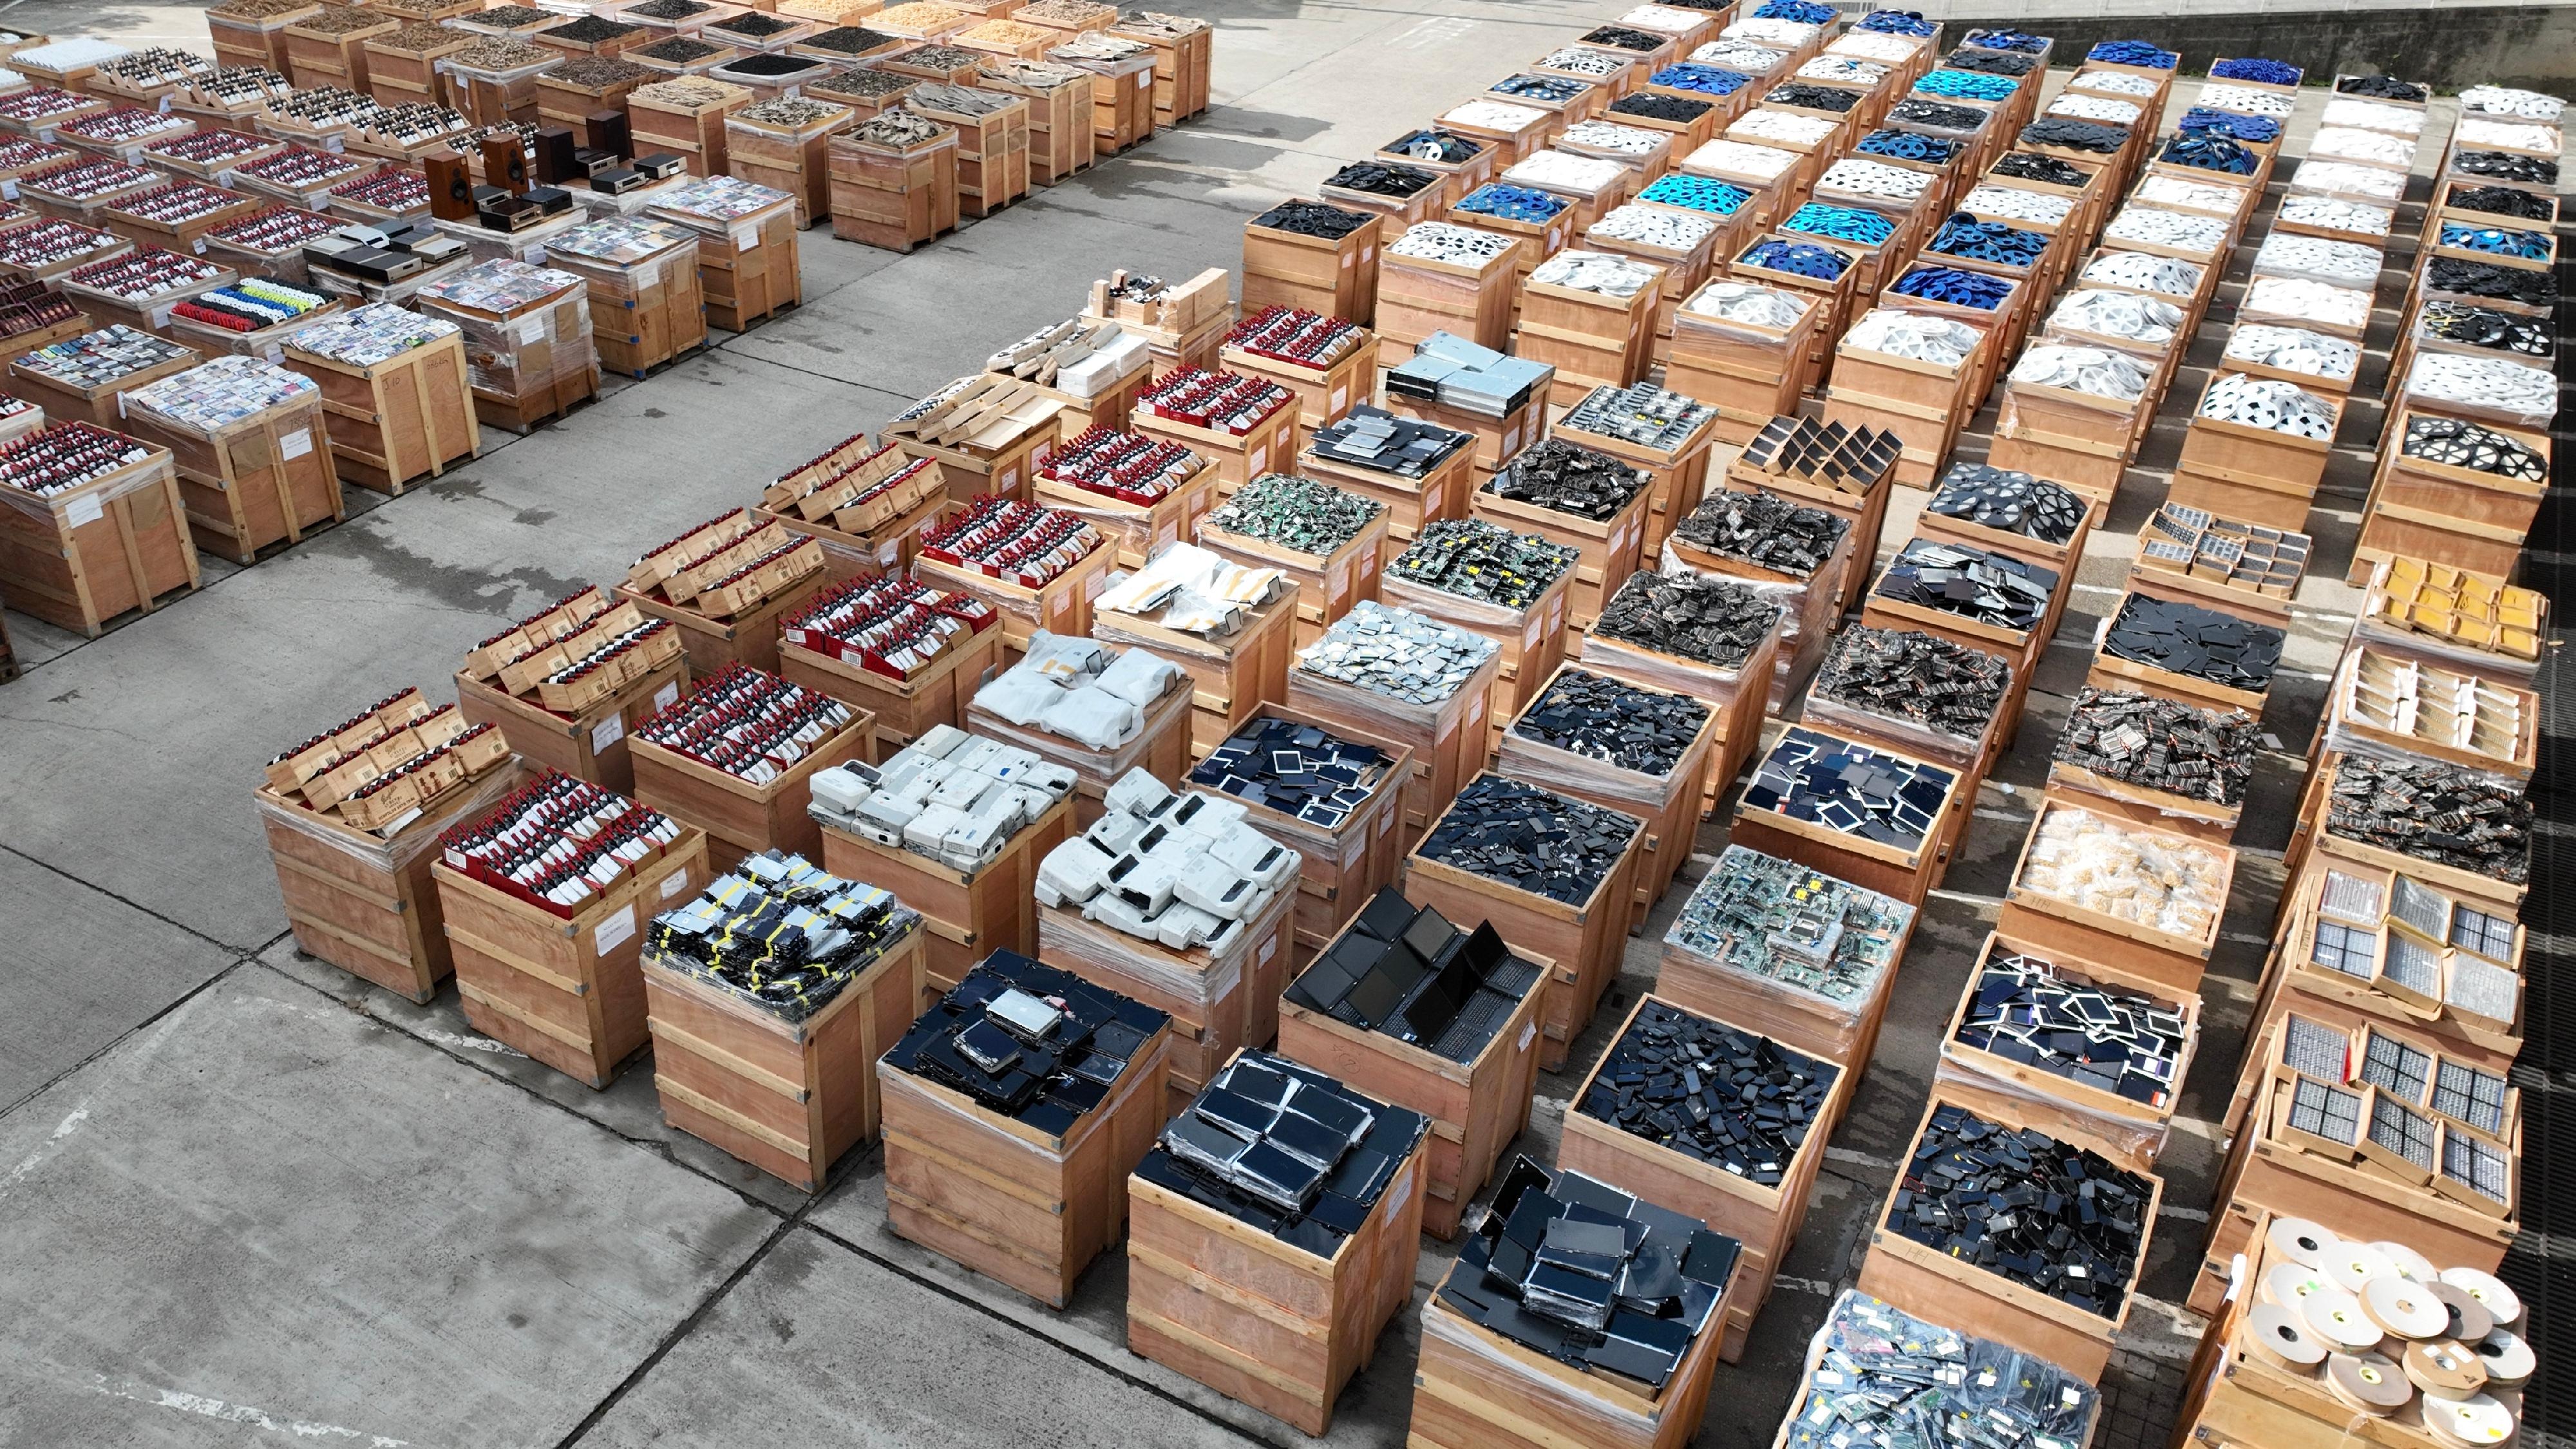 ​Hong Kong Customs on June 13 detected a suspected case of an ocean-going vessel being used to smuggle goods to the Mainland via Singapore at the Kwai Tsing Container Terminals. A large batch of suspected smuggled goods, including electronic goods, expensive food ingredients, table wines, music records and scheduled endangered species, with a total estimated market value of about $1.5 billion was seized. This is the largest smuggling case detected by Customs on record in terms of the seizure value. Photo shows some of the suspected smuggled goods seized.